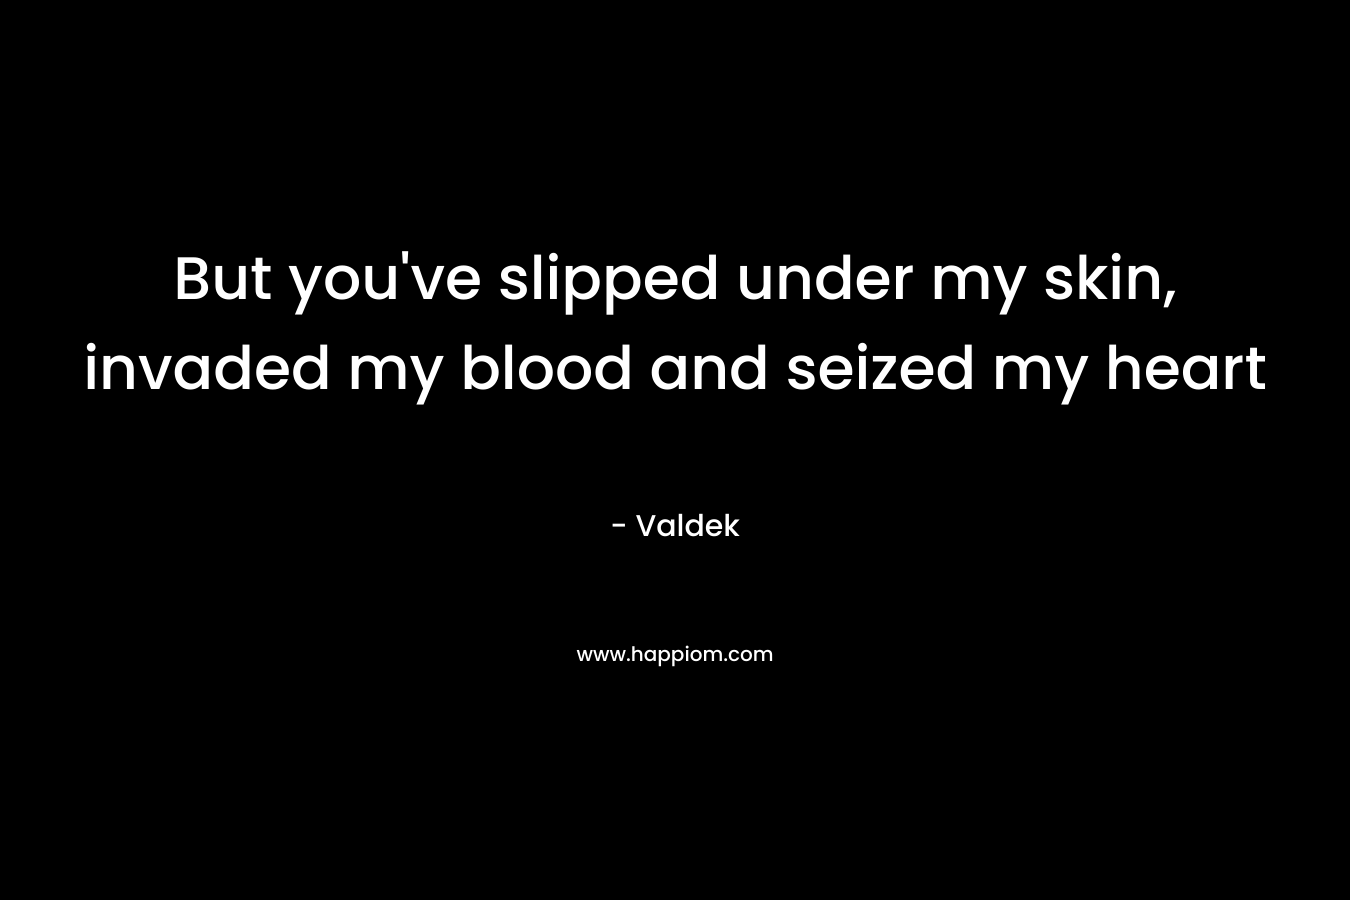 But you've slipped under my skin, invaded my blood and seized my heart